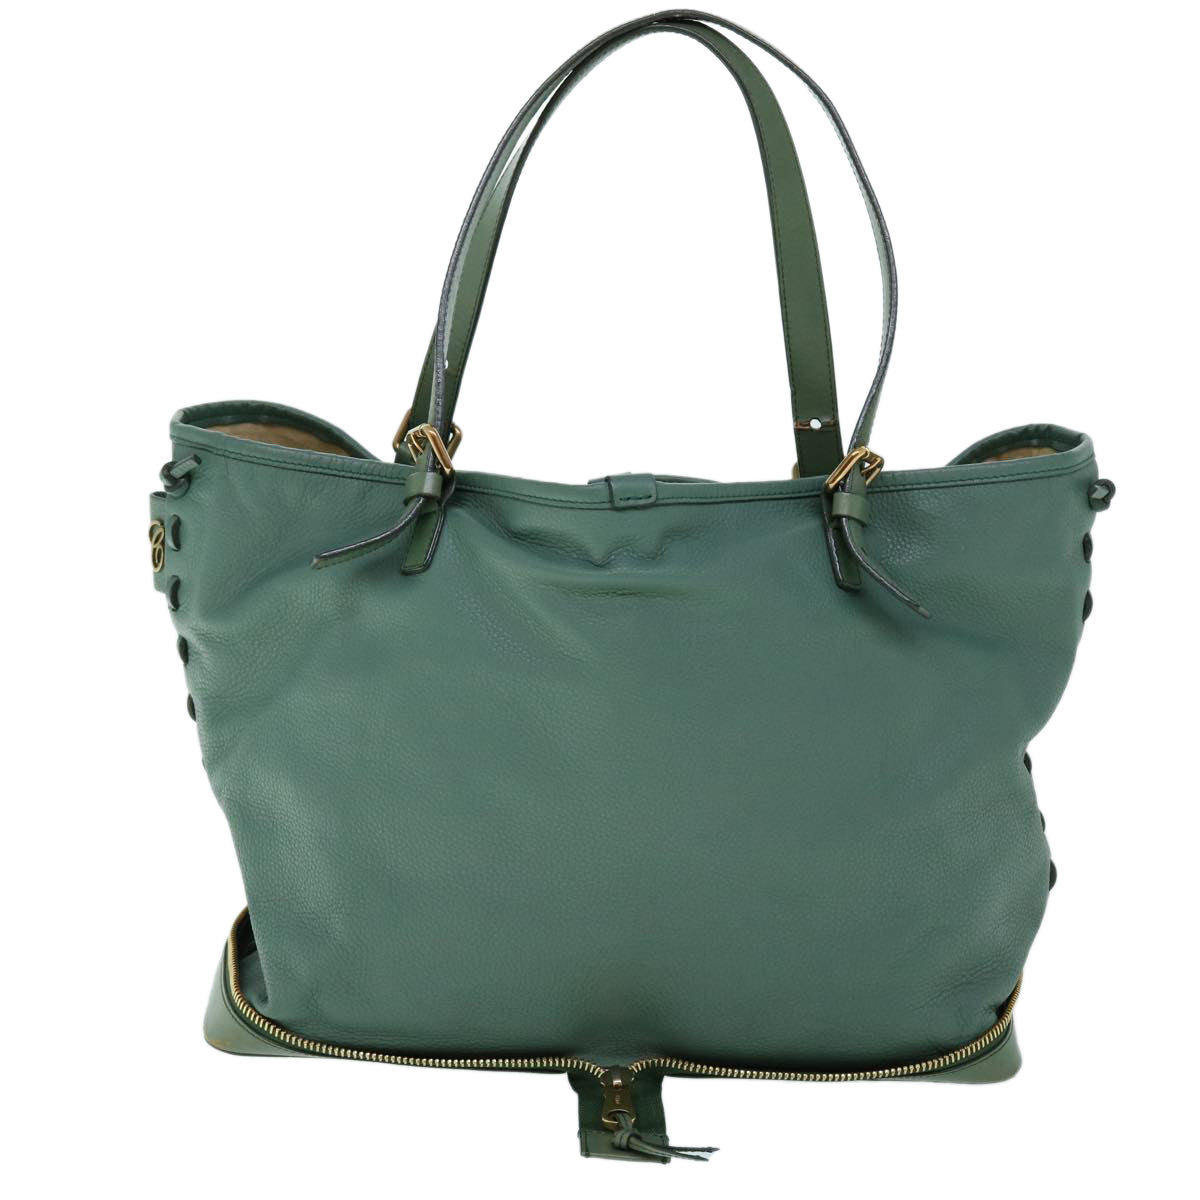 Chloe Tote Bag Leather Green Auth bs8301